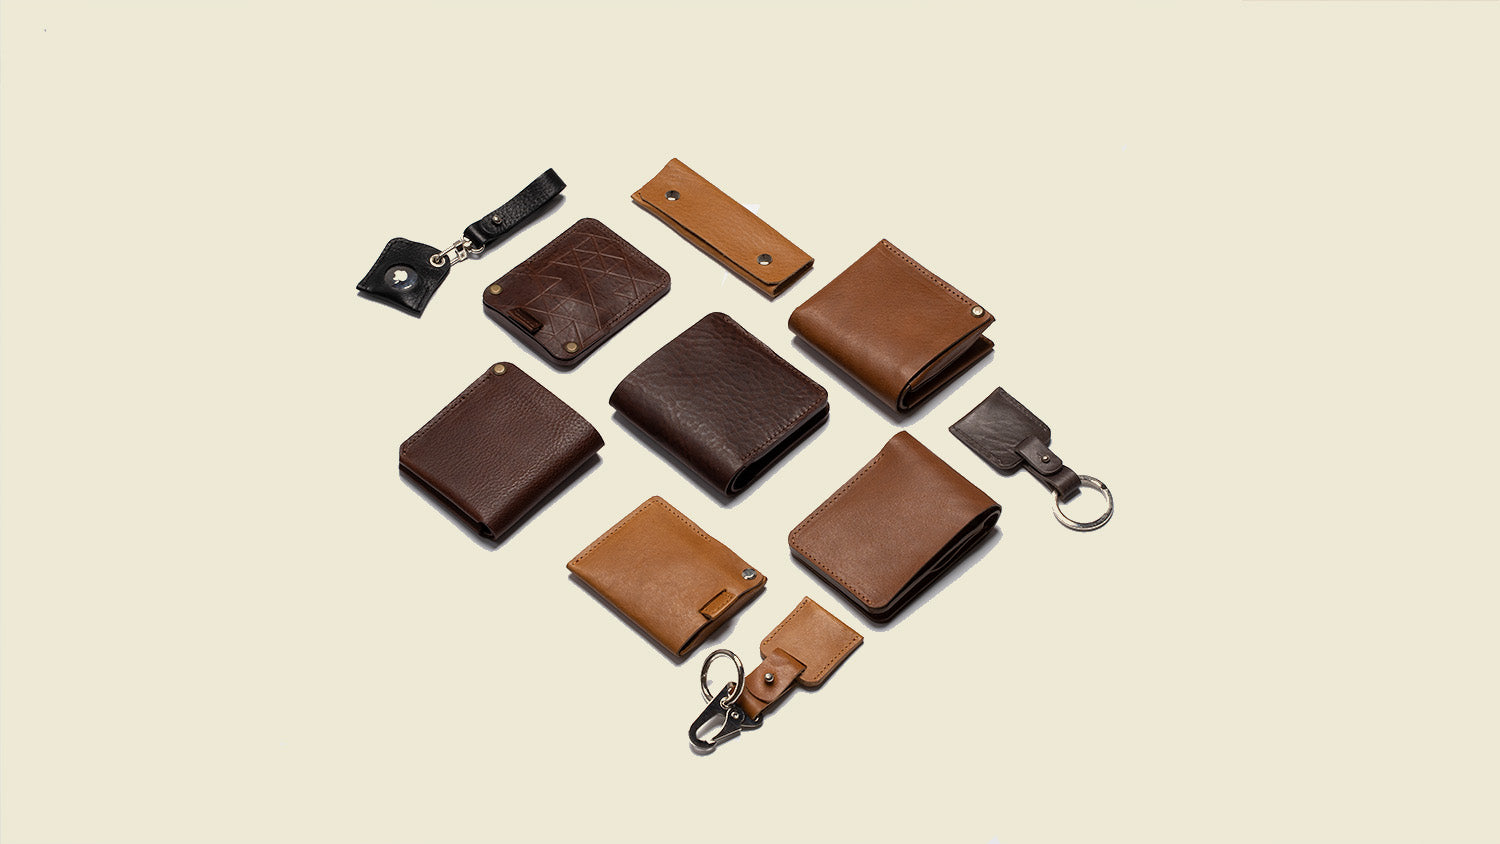 Geometric Goods iPhone Leather Wallet with MagSafe Deep Safron